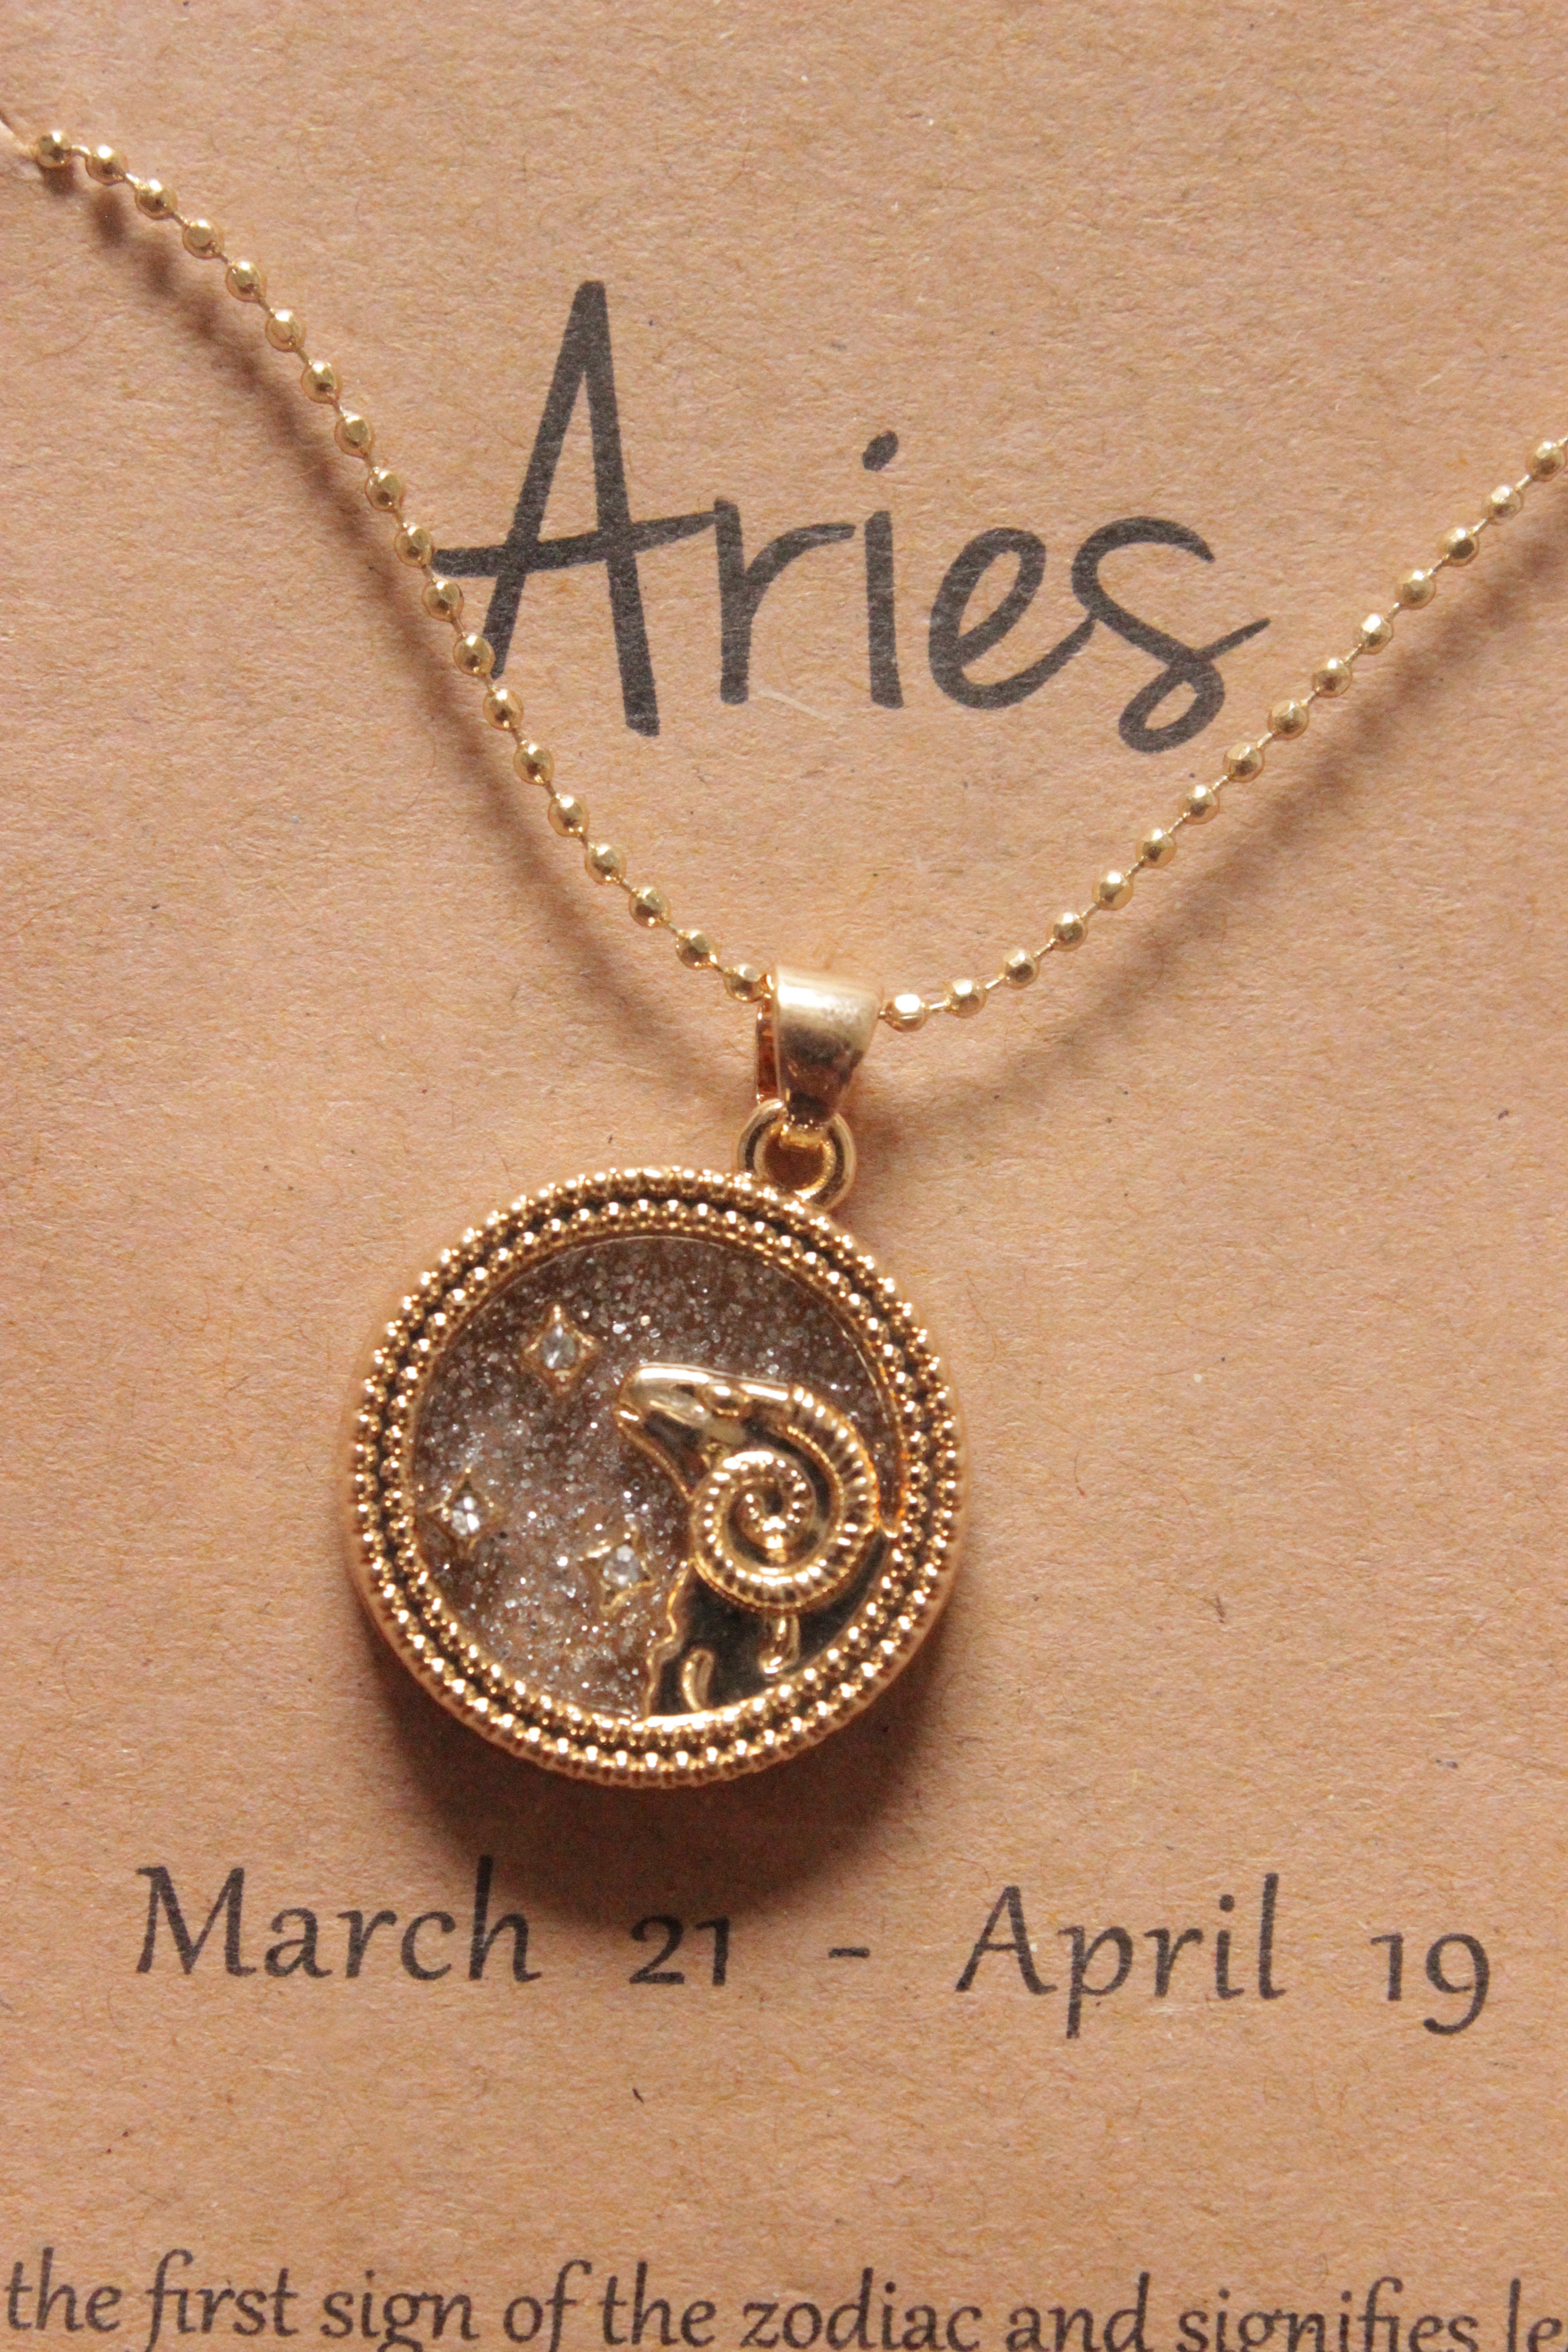 Aries Sun Sign Gold Plated Day Style Round Resin Horoscope Astrology Minimalist Pendant Necklace with Card